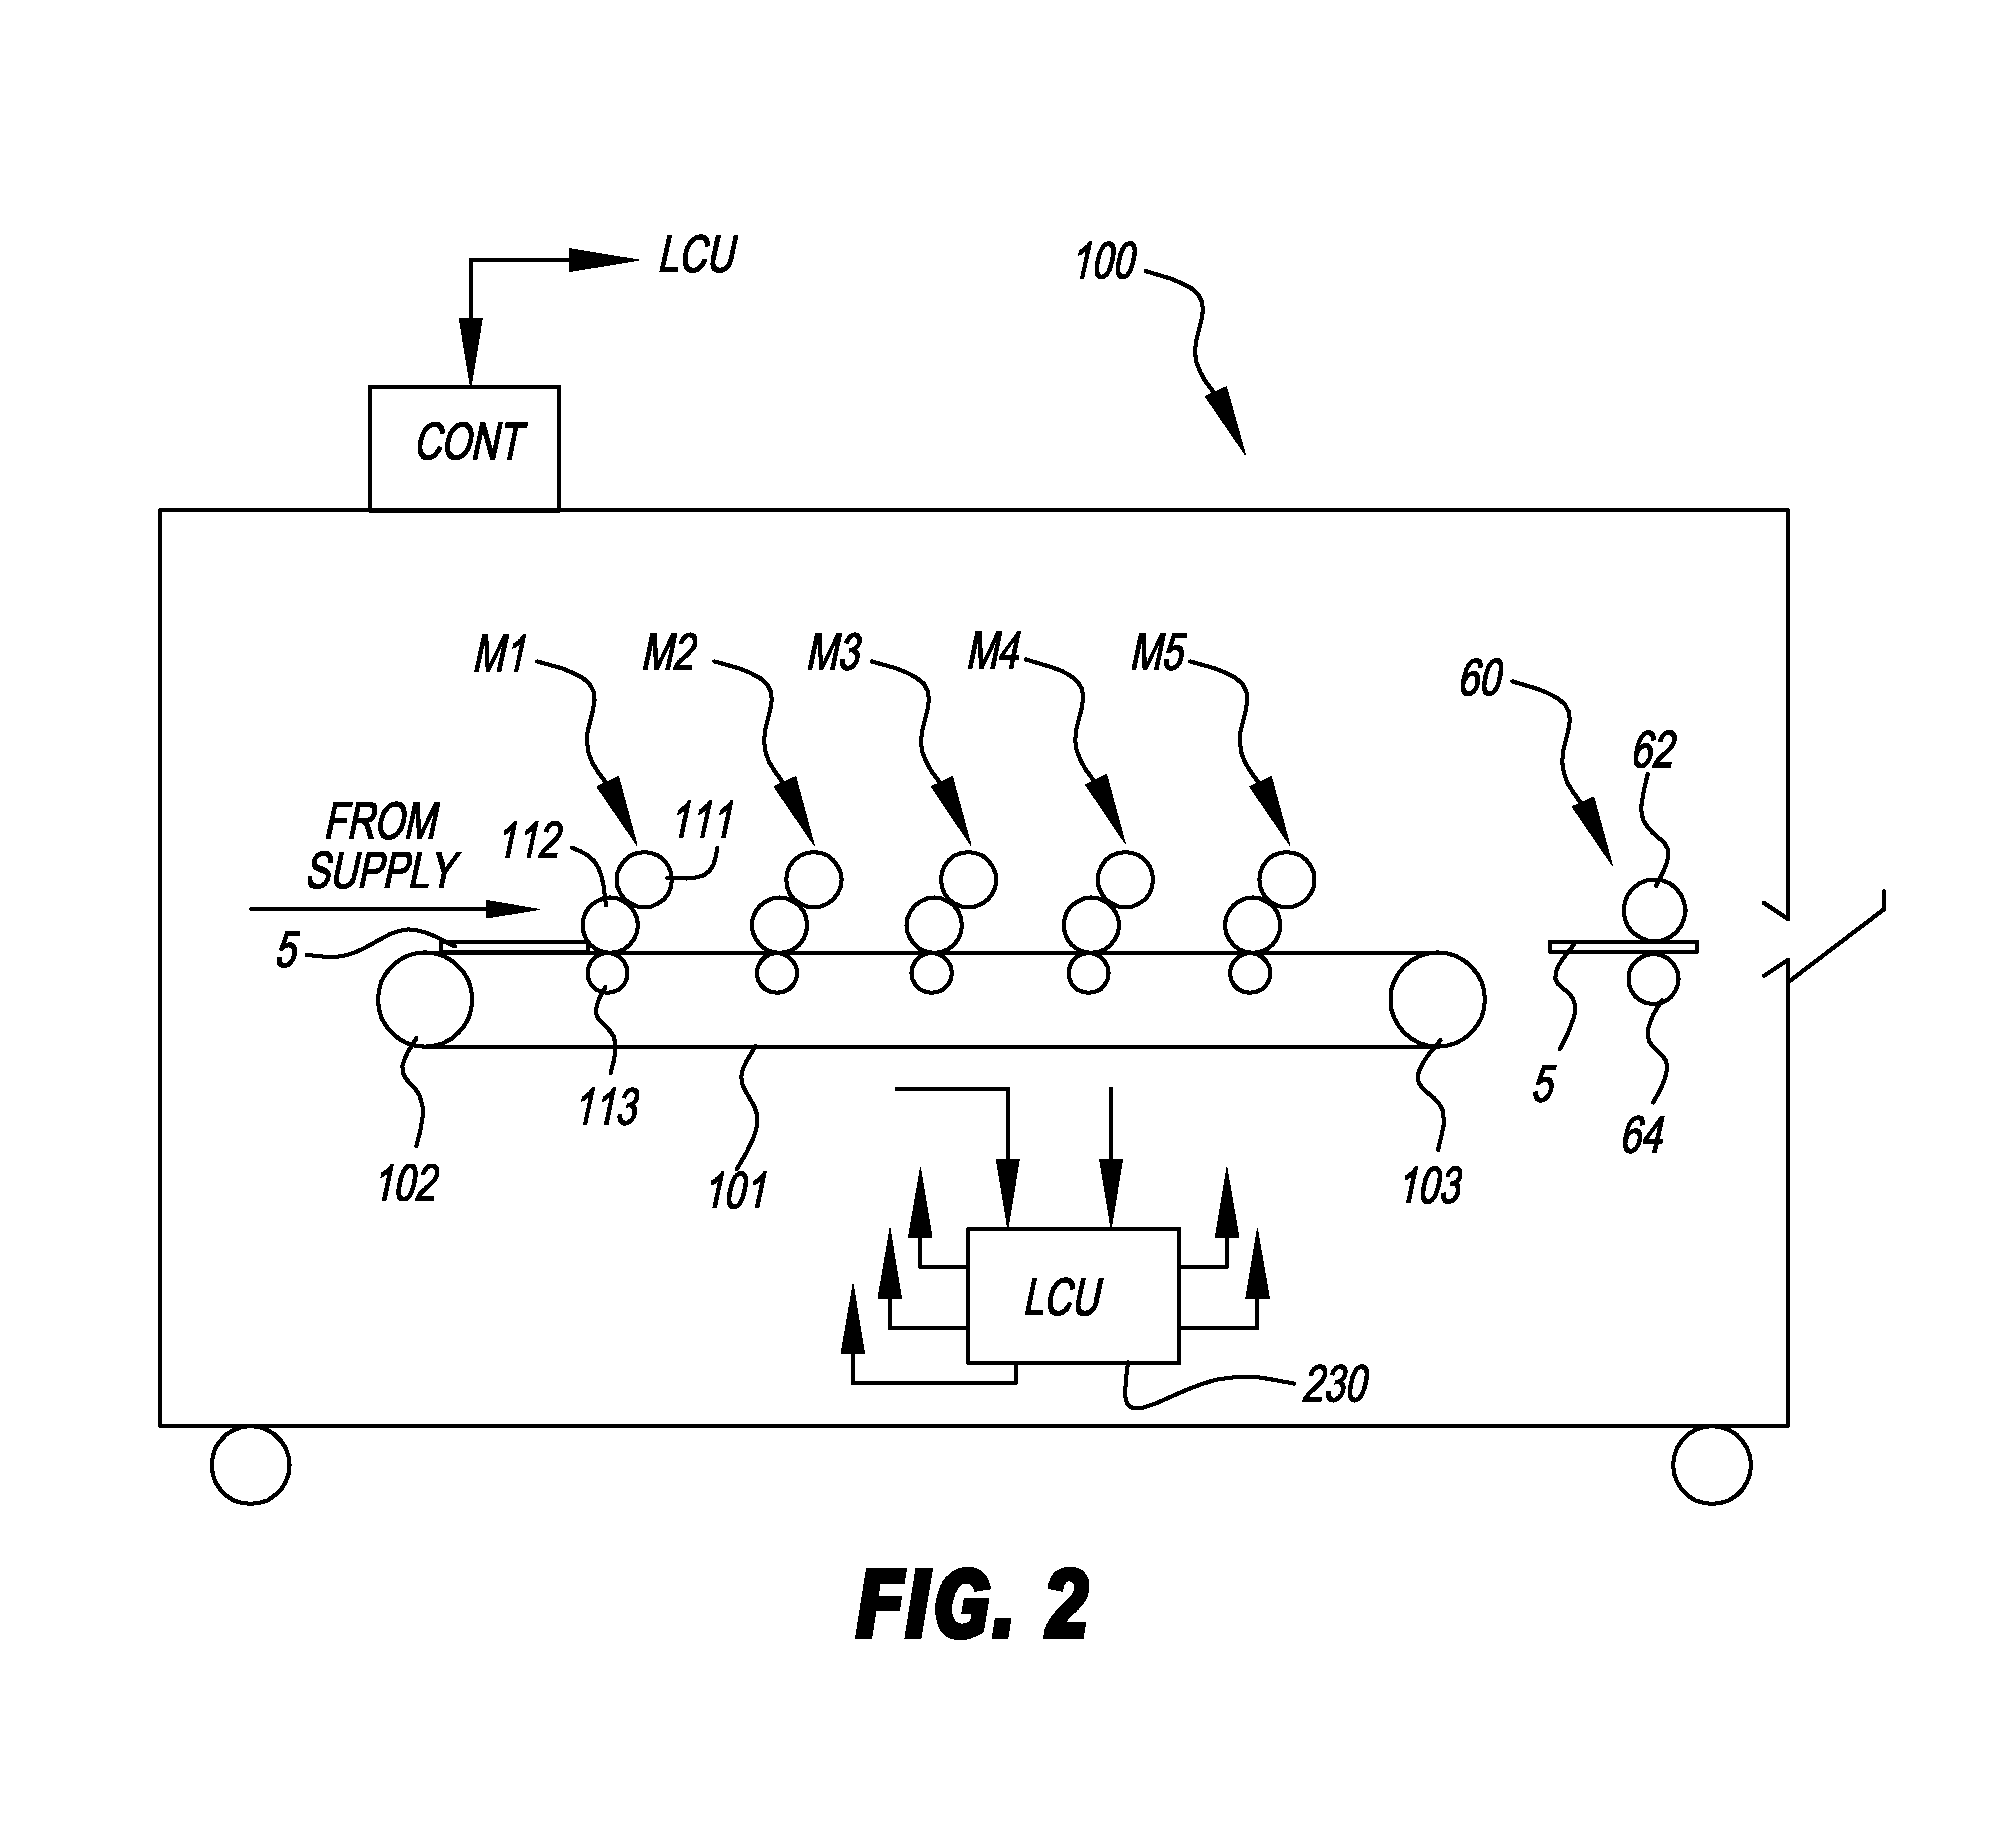 Printed product with raised authentication feature